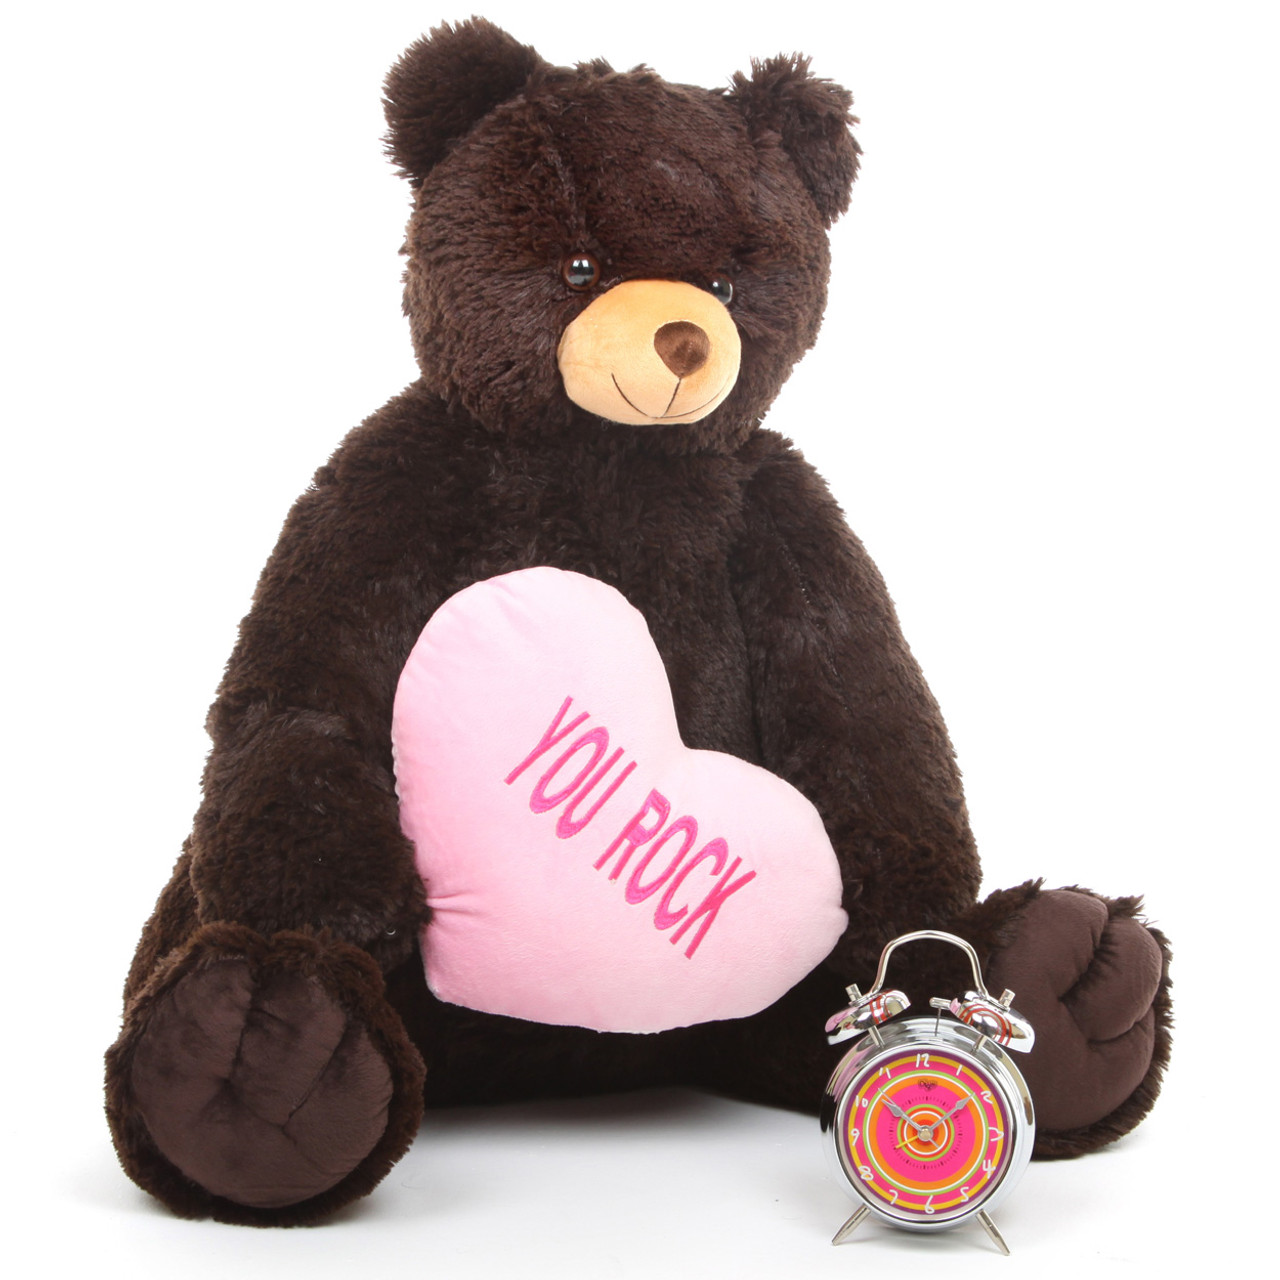 Baby Heart Tubs chocolate brown teddy bear with heart 32in